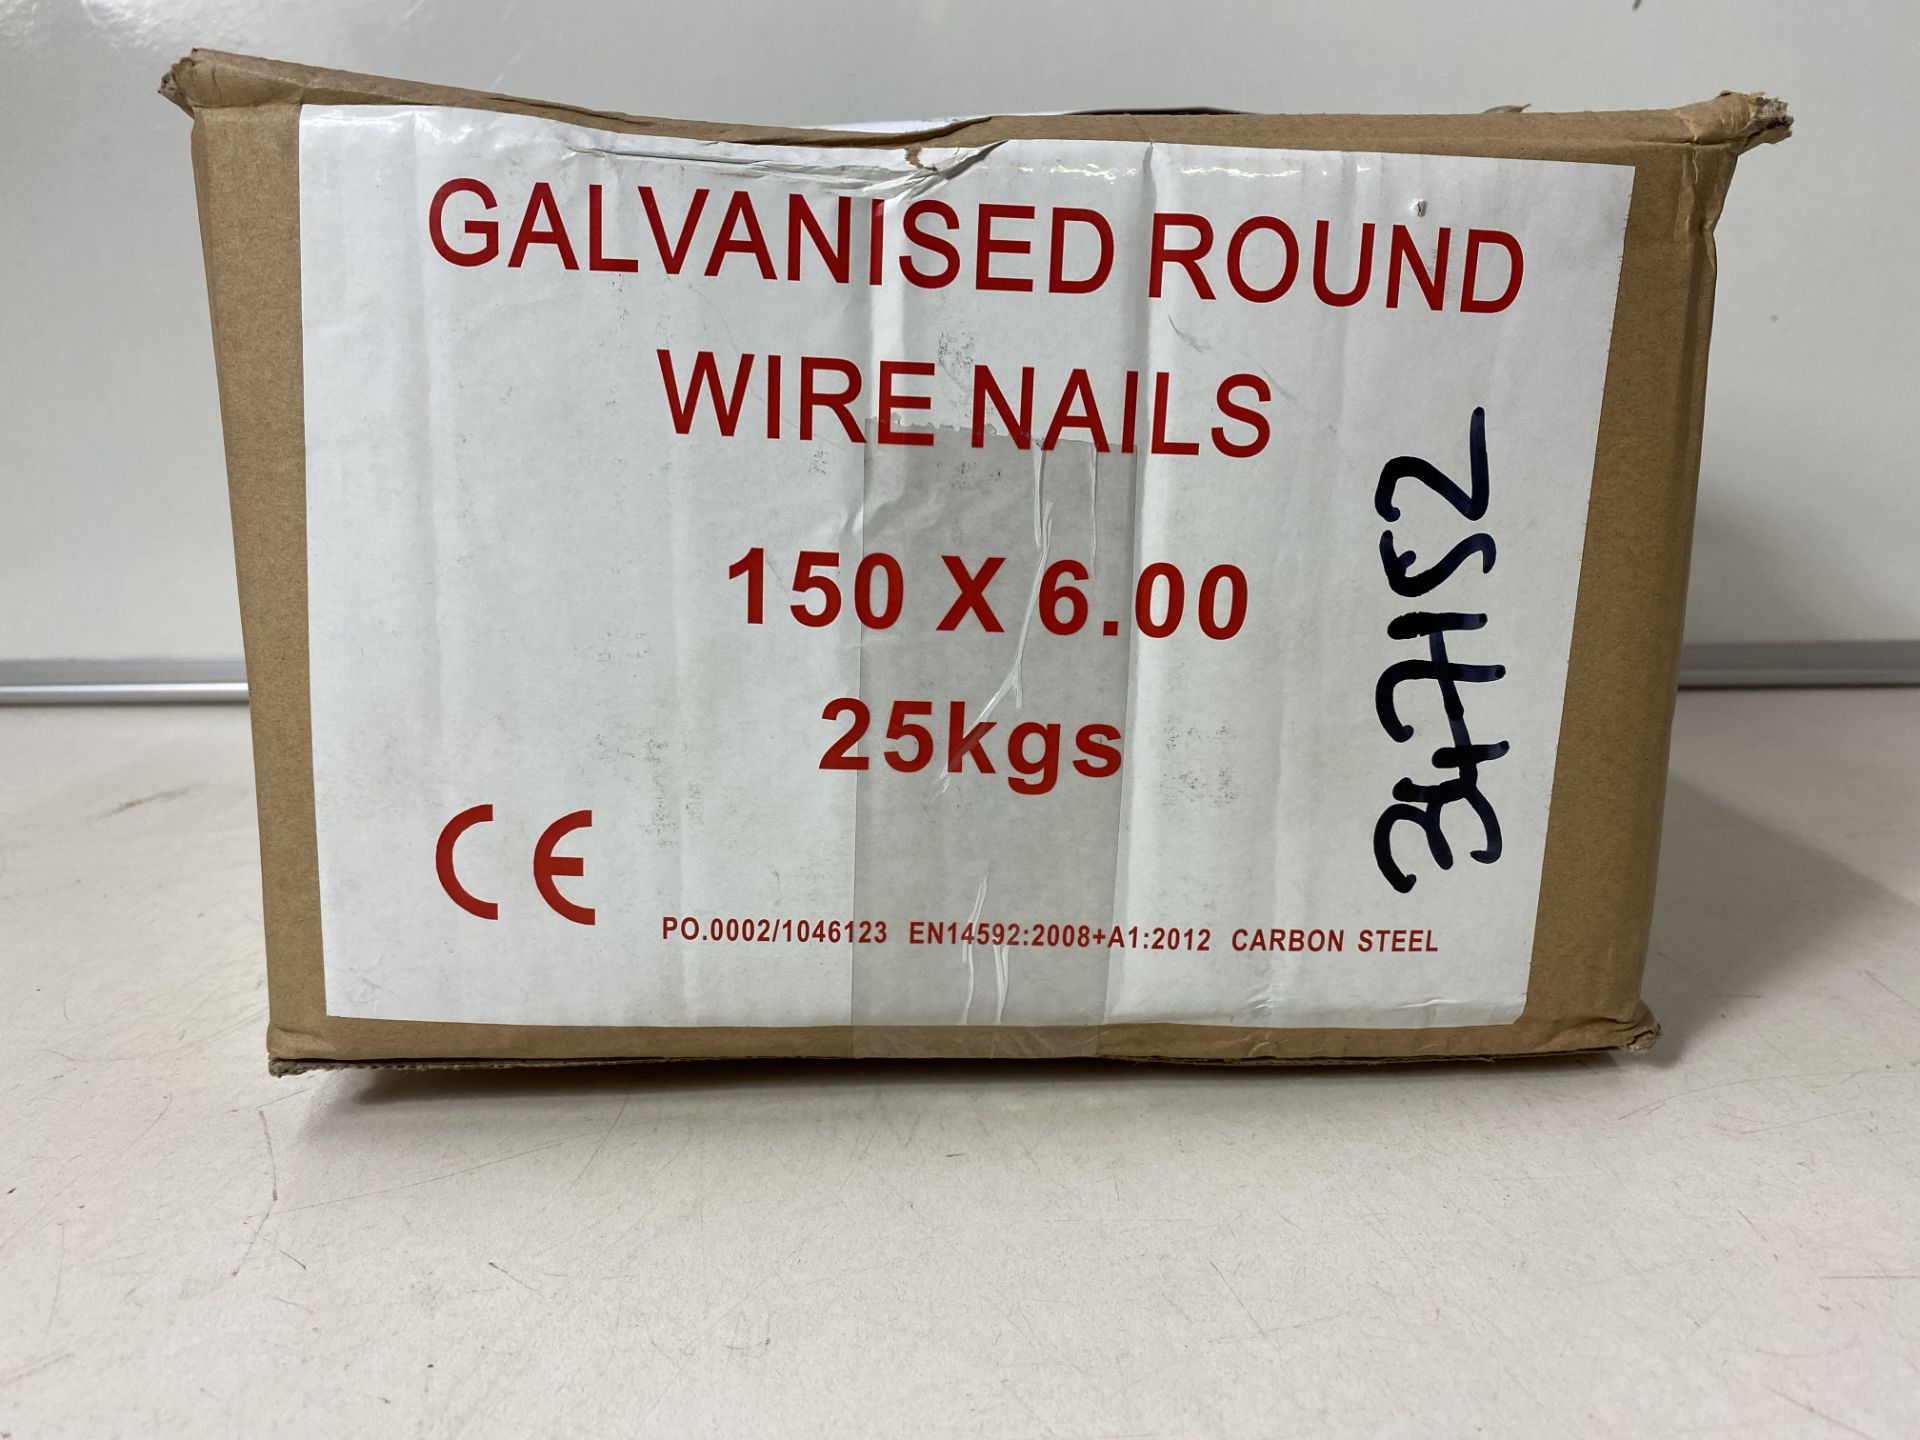 Box Of Galvanised Round Wire Nails - Image 3 of 3